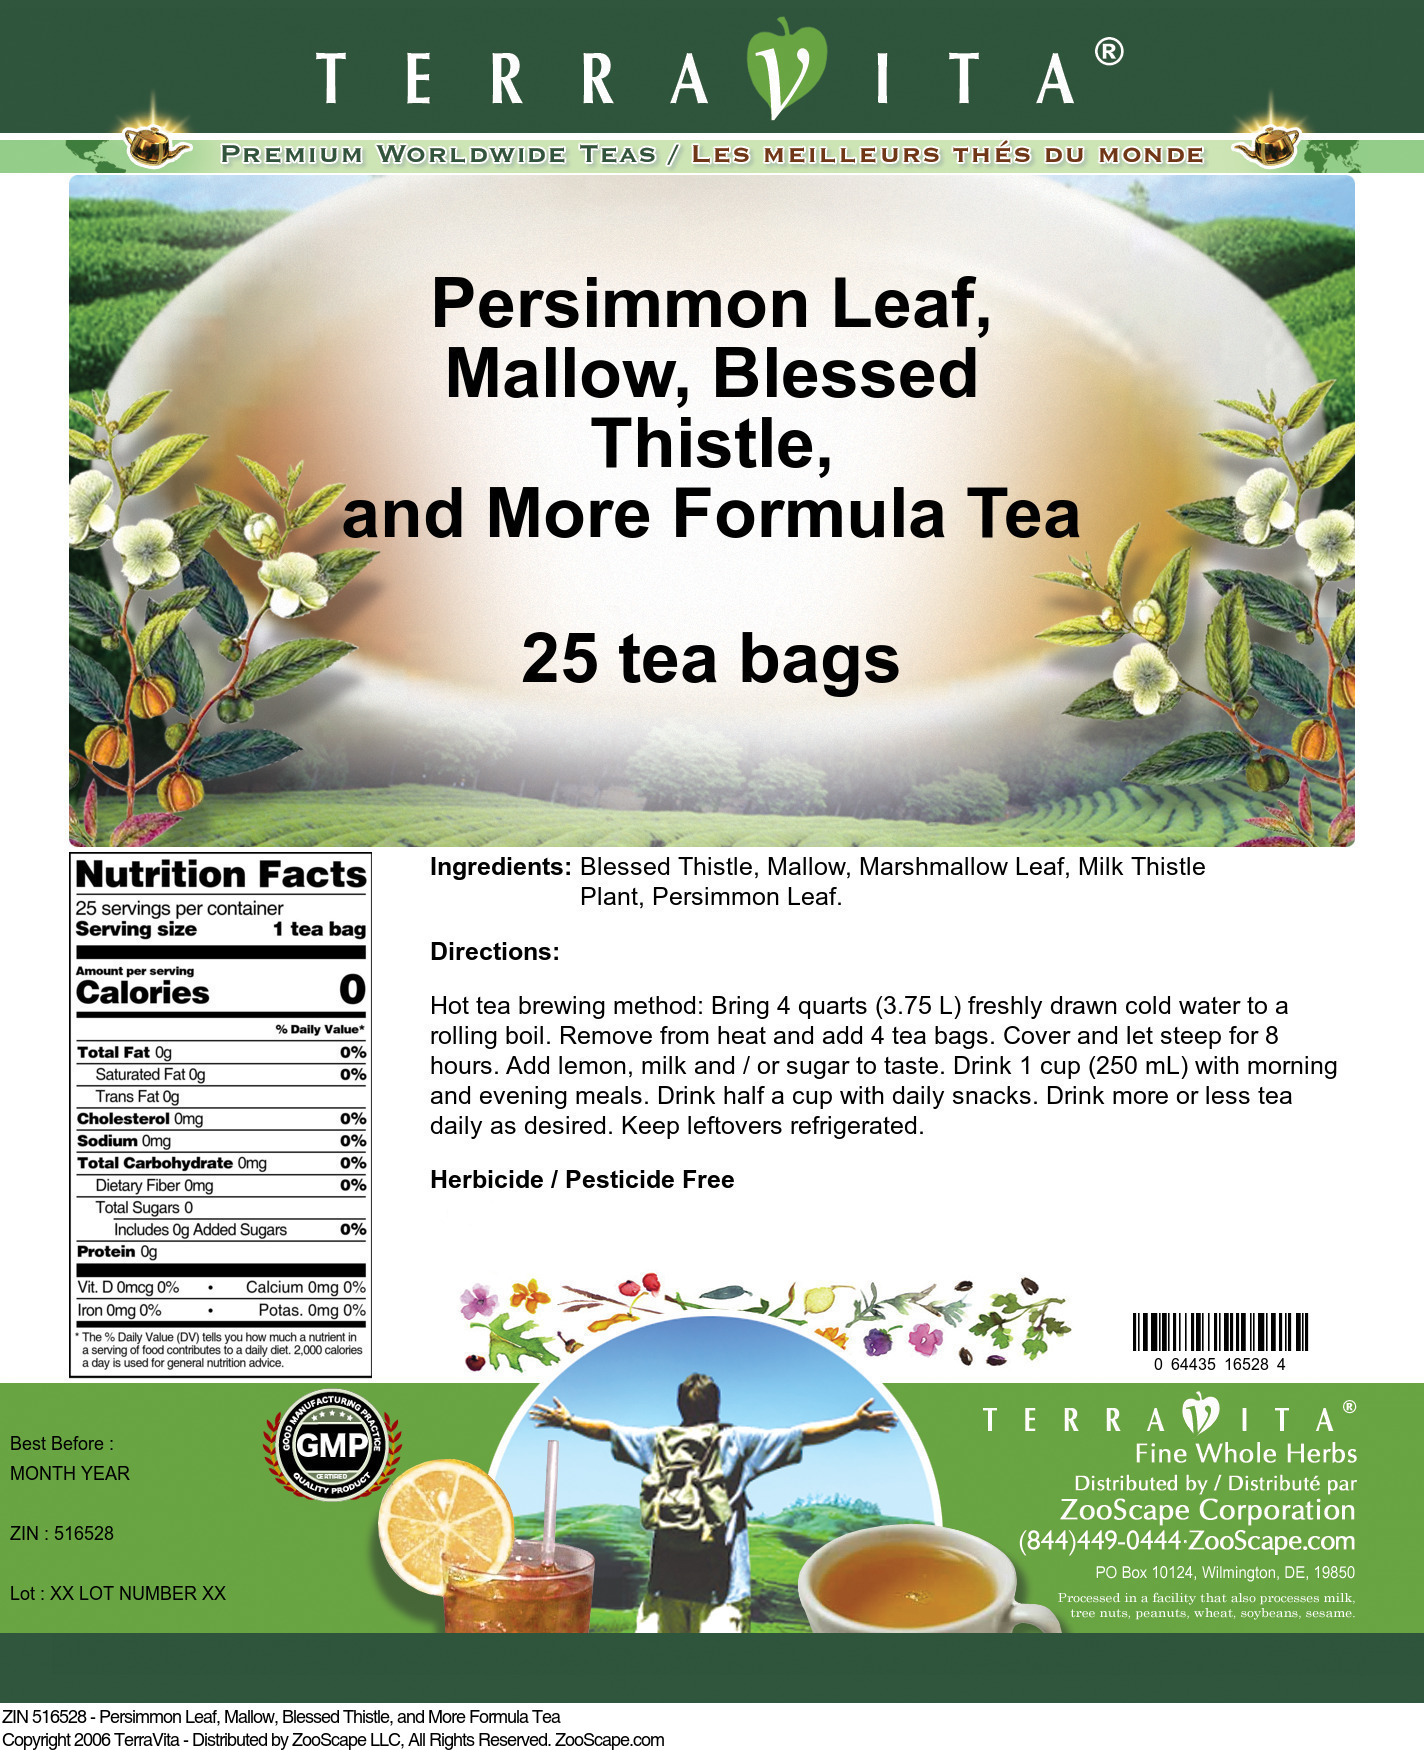 Persimmon Leaf, Mallow, Blessed Thistle, and More Formula Tea - Label